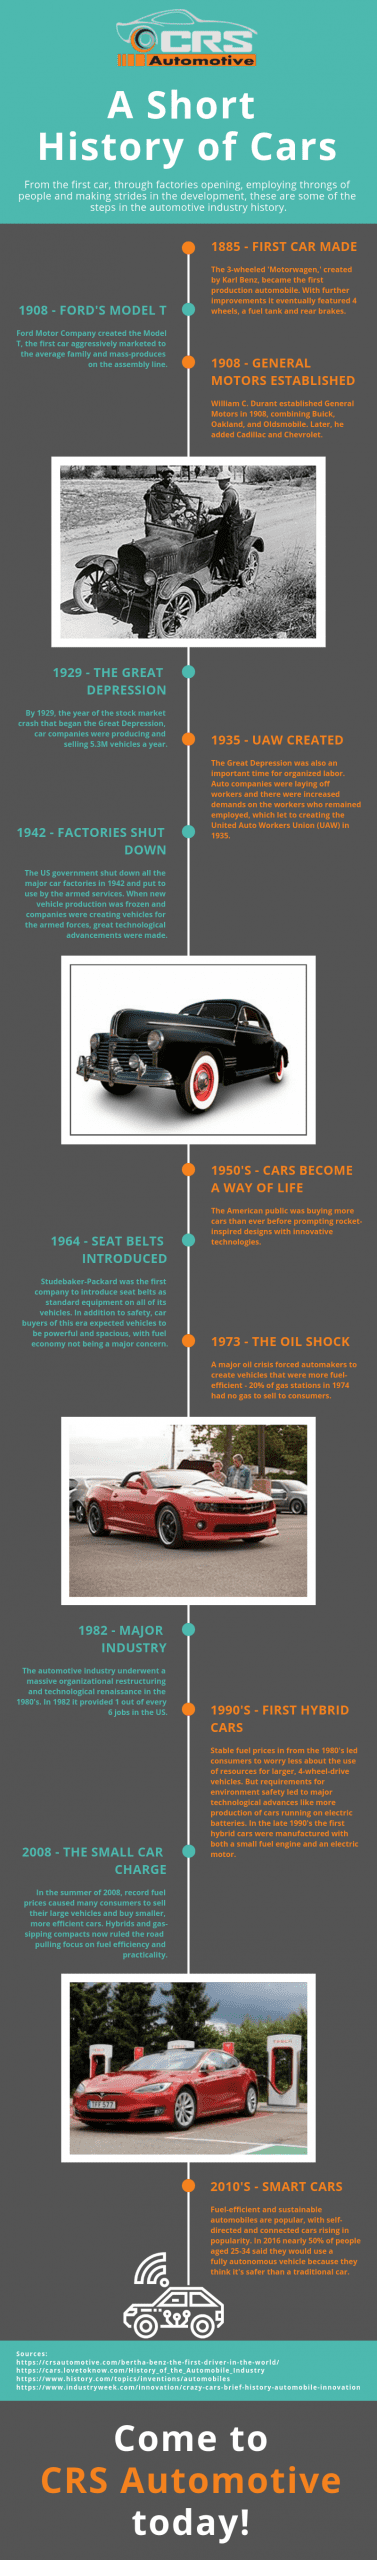 A Short History of Cars Infographic